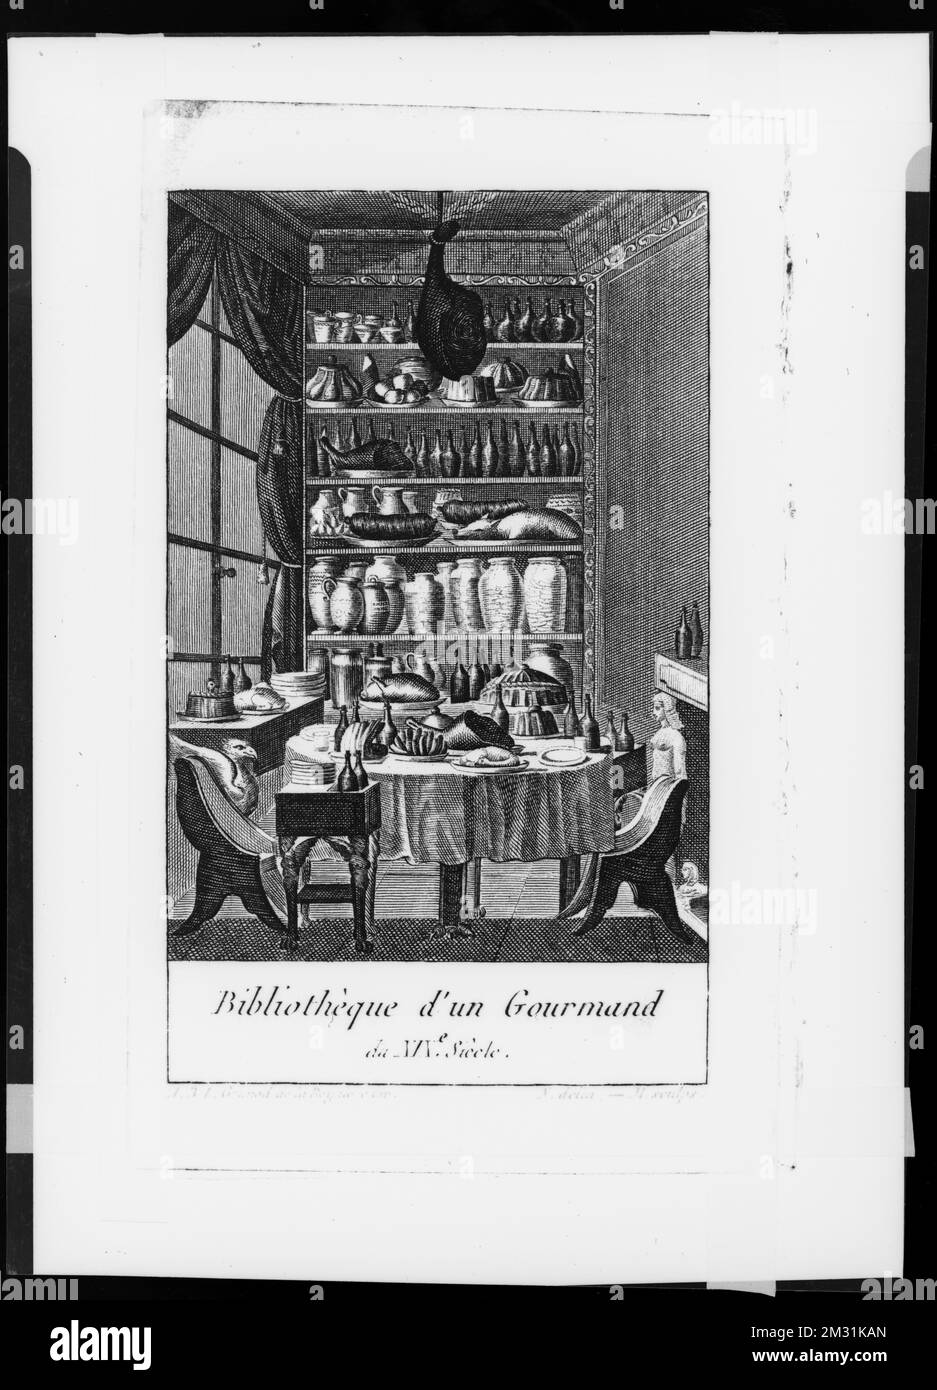 Frontispiece from Almanach Des Gourmands by Grimod de La Reyniere (1803) , Prints, Food, Dining tables. Samuel Chamberlain Photograph Negatives Collection Stock Photo